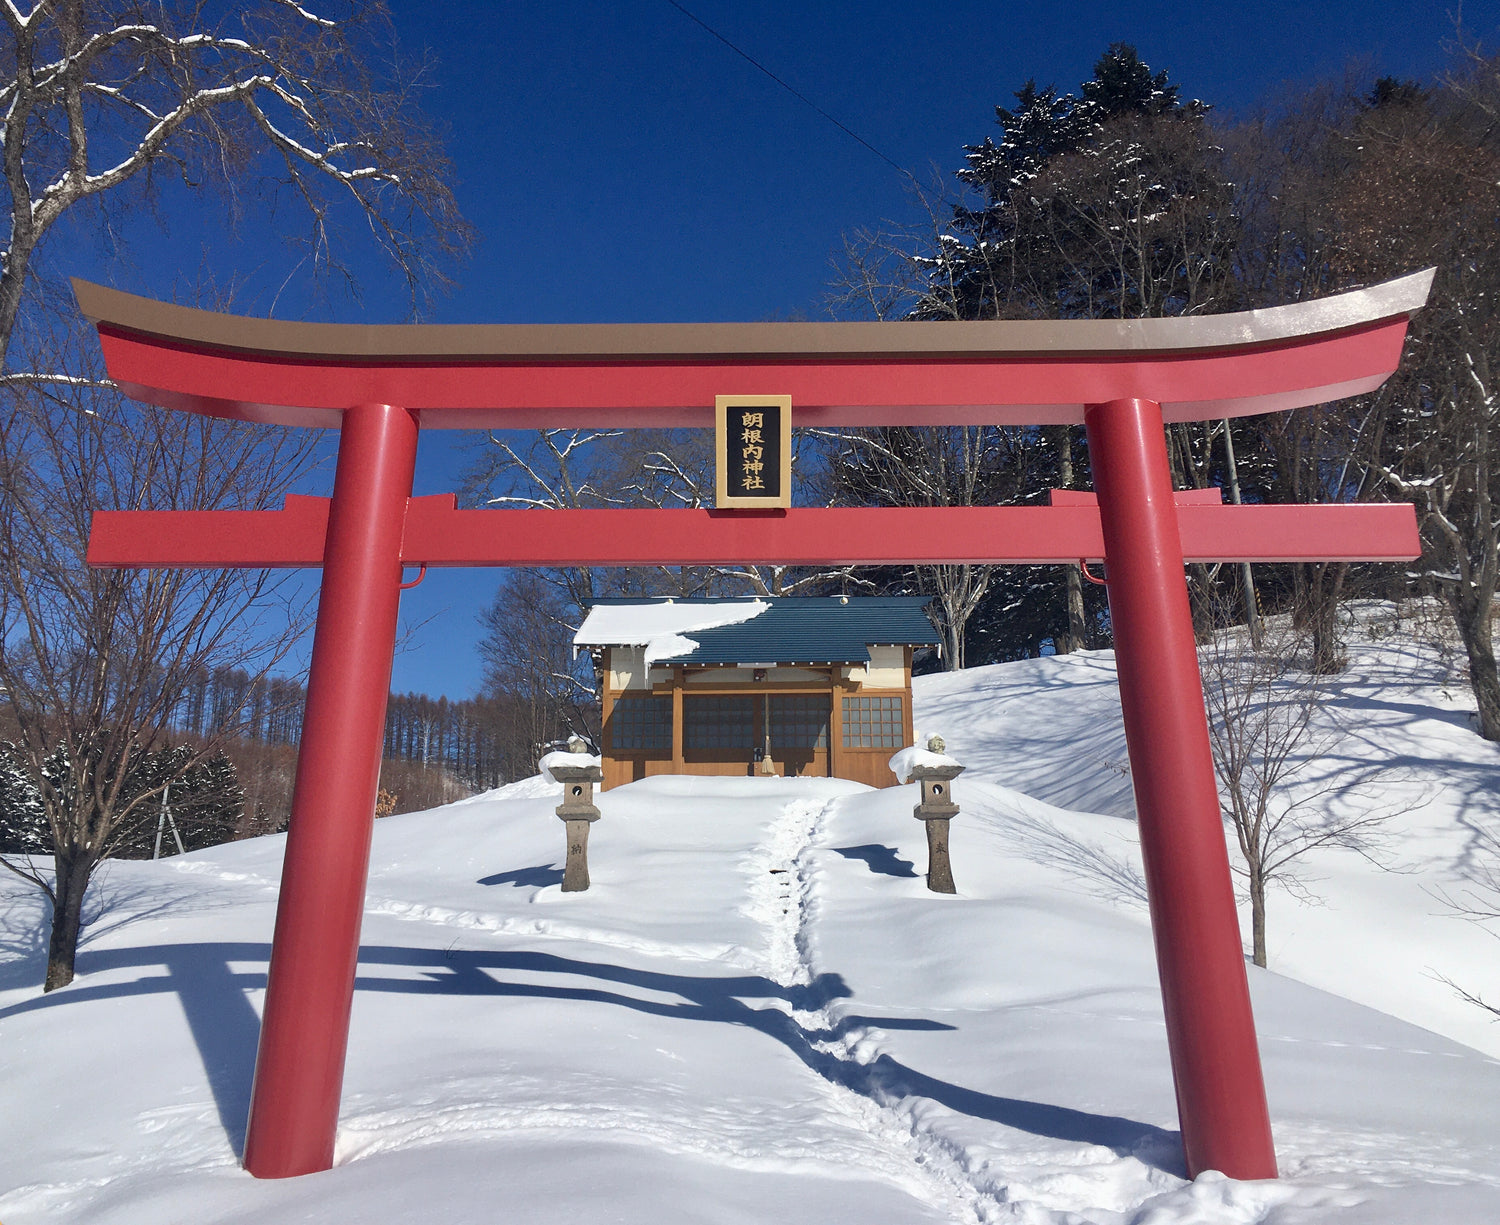 An almost daily site this shrine always meant a day of powder was waiting for us on the mountain. A Japanese shrine.